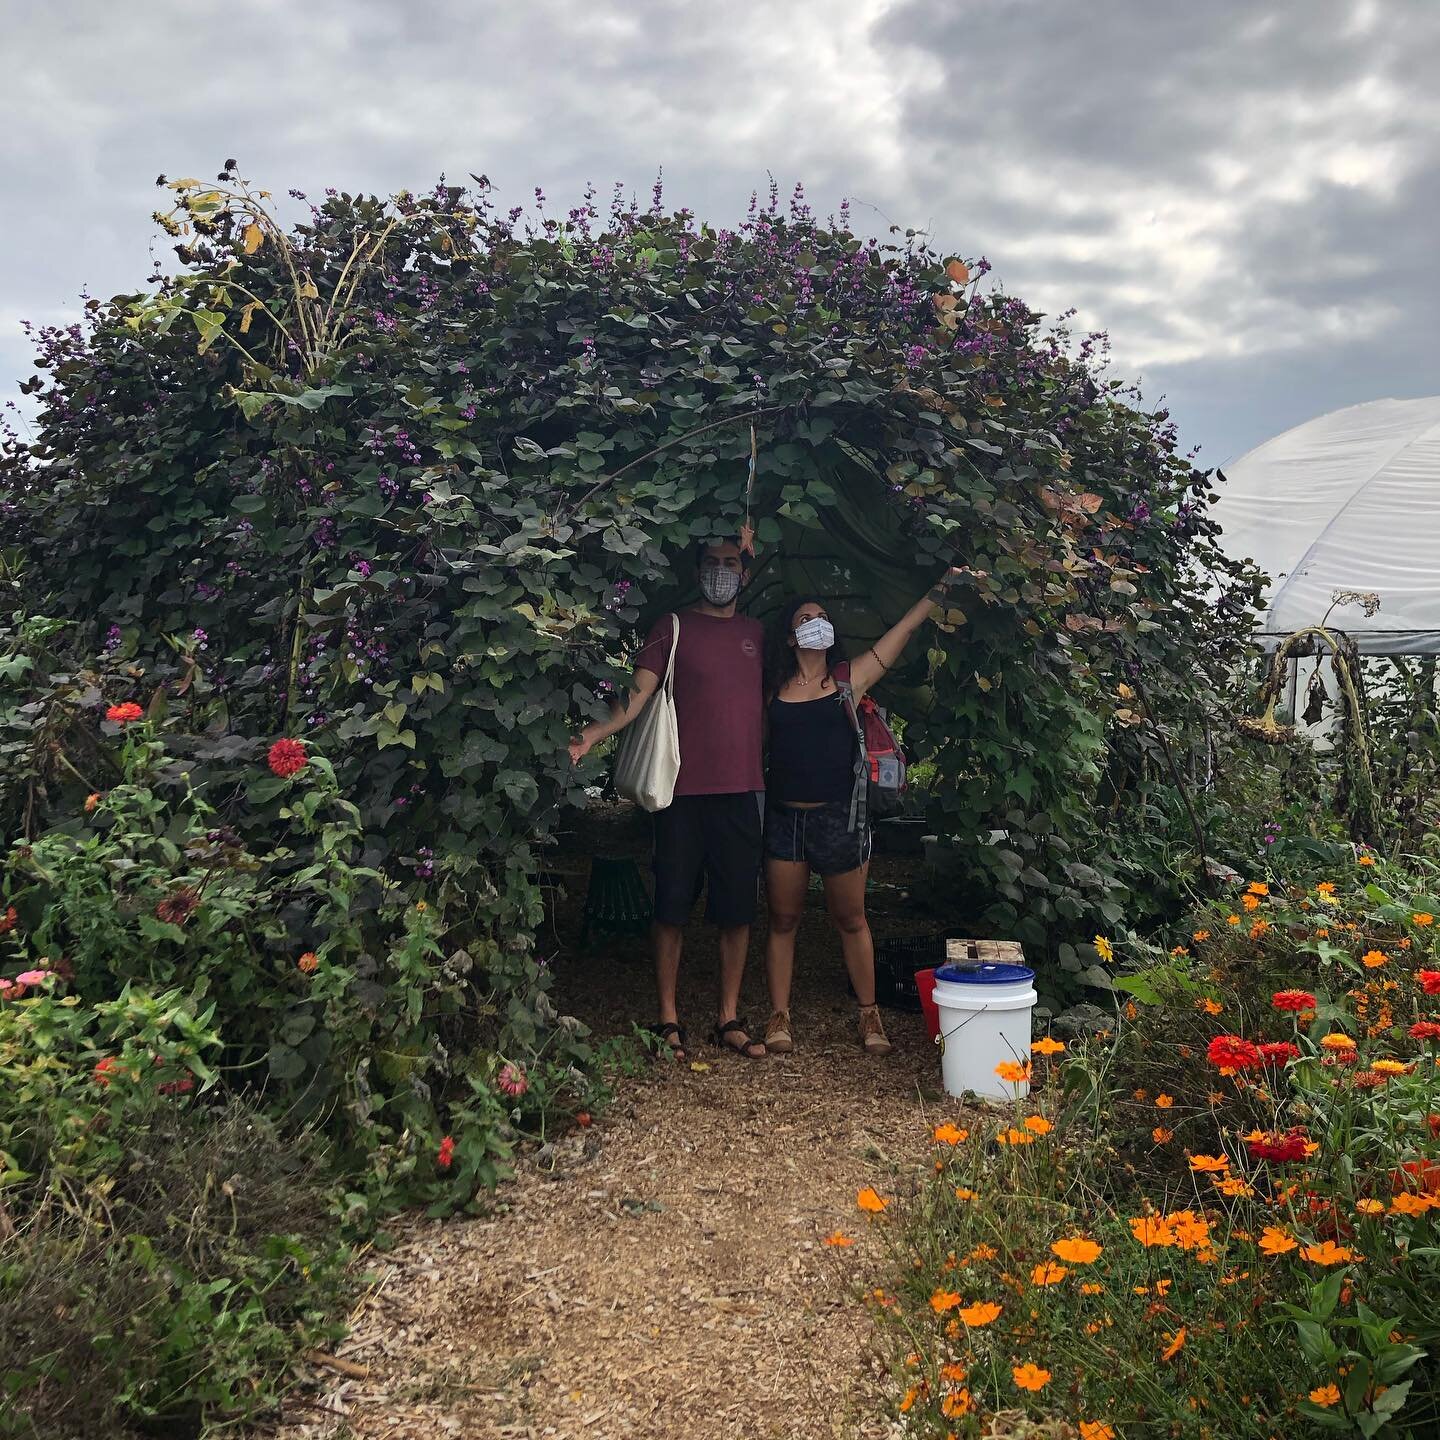 Amazing plant dome designed with kiddos in mind&mdash;at Potomac Vegetable farms!
#plantdome #potomacvegetablefarms #naturalarchitecture #plantarchitecture #outdoorschool #permaculture #permaculturedesign #permaculturedesigncourse